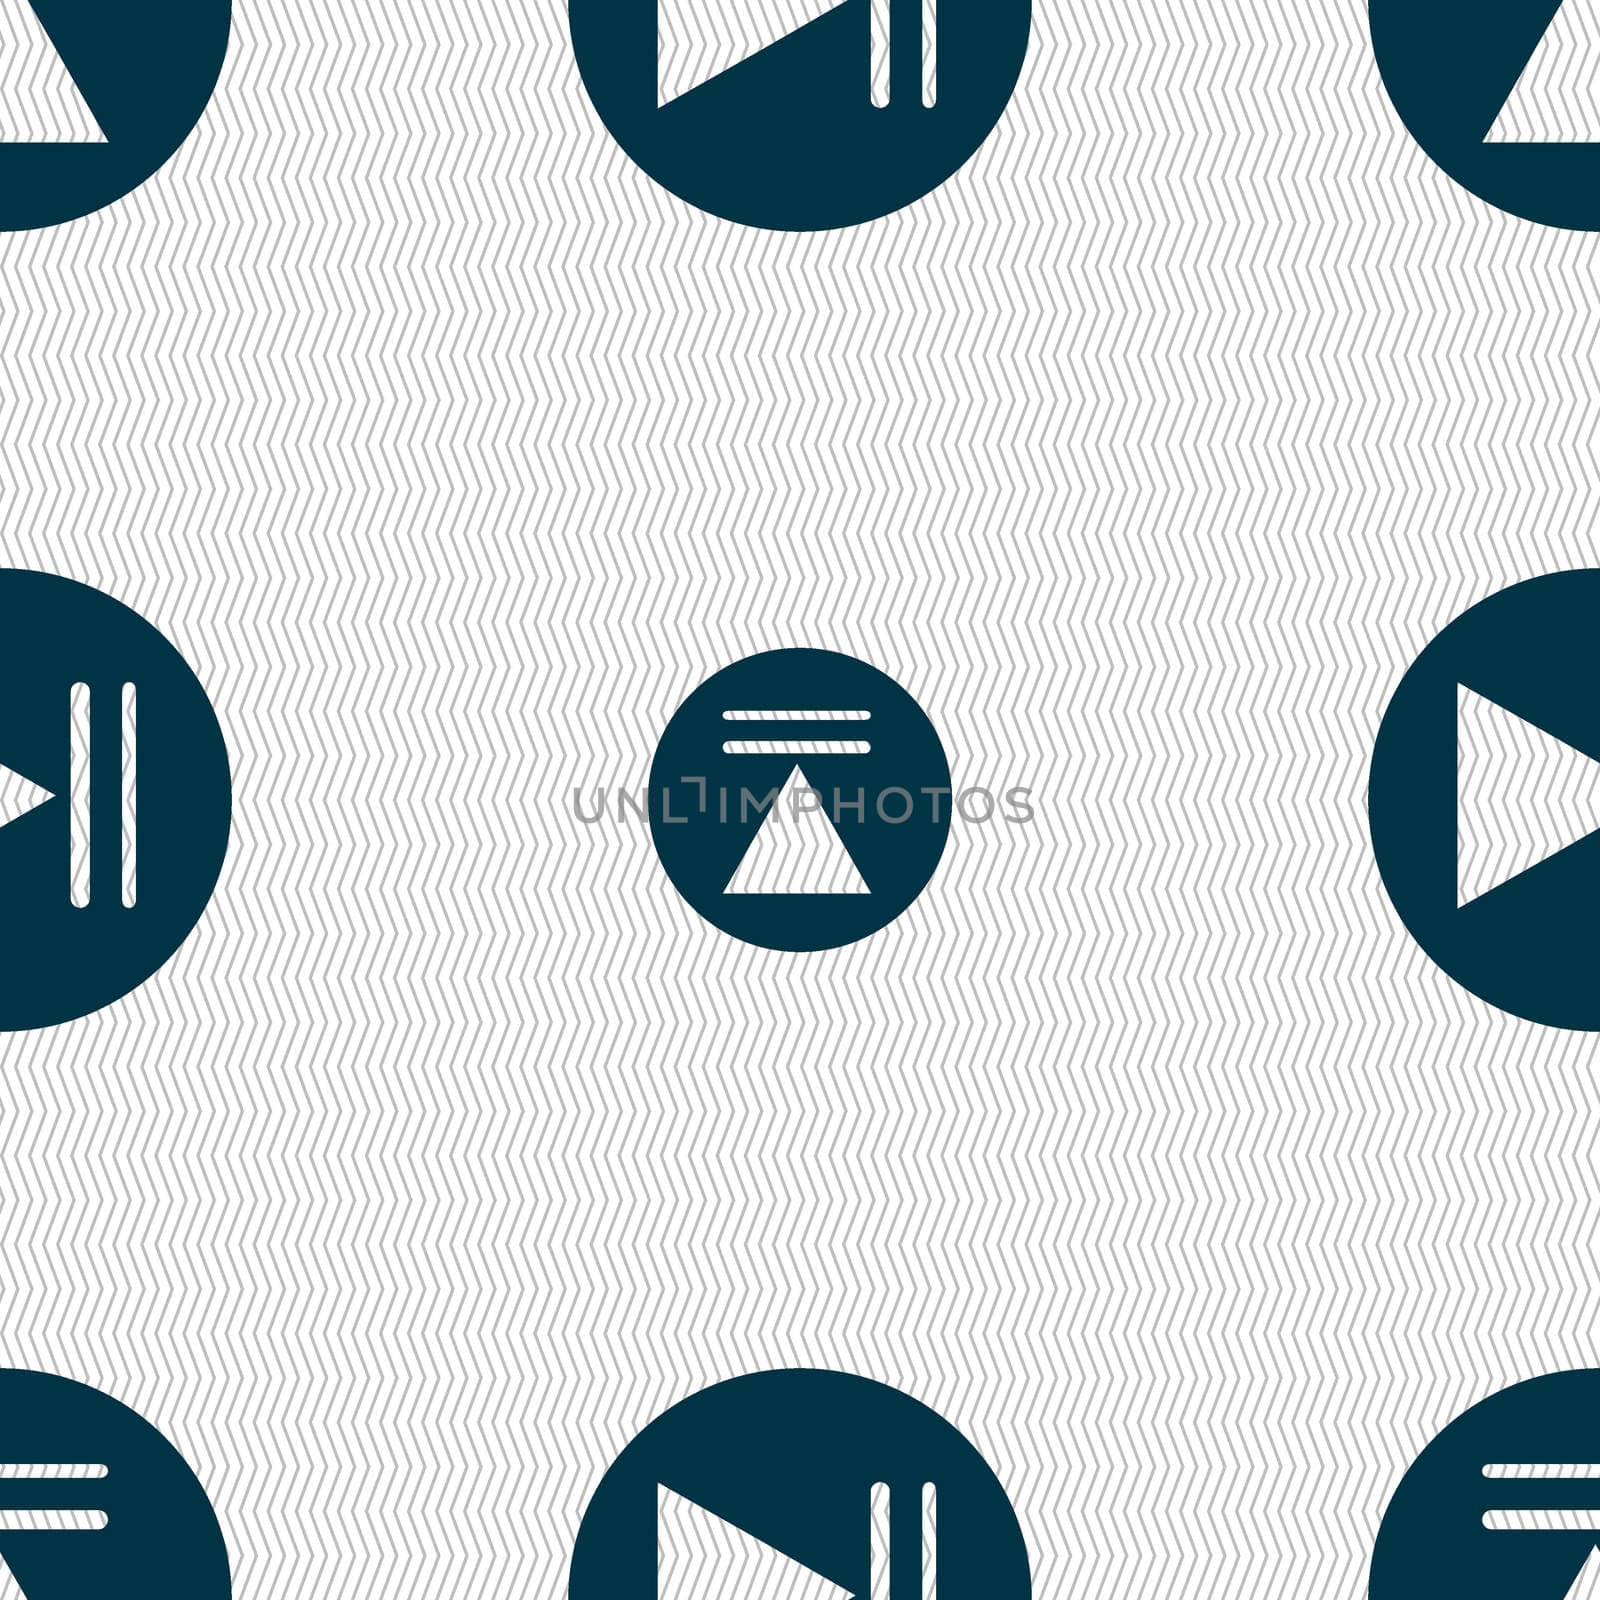 play button icon. Seamless abstract background with geometric shapes. illustration